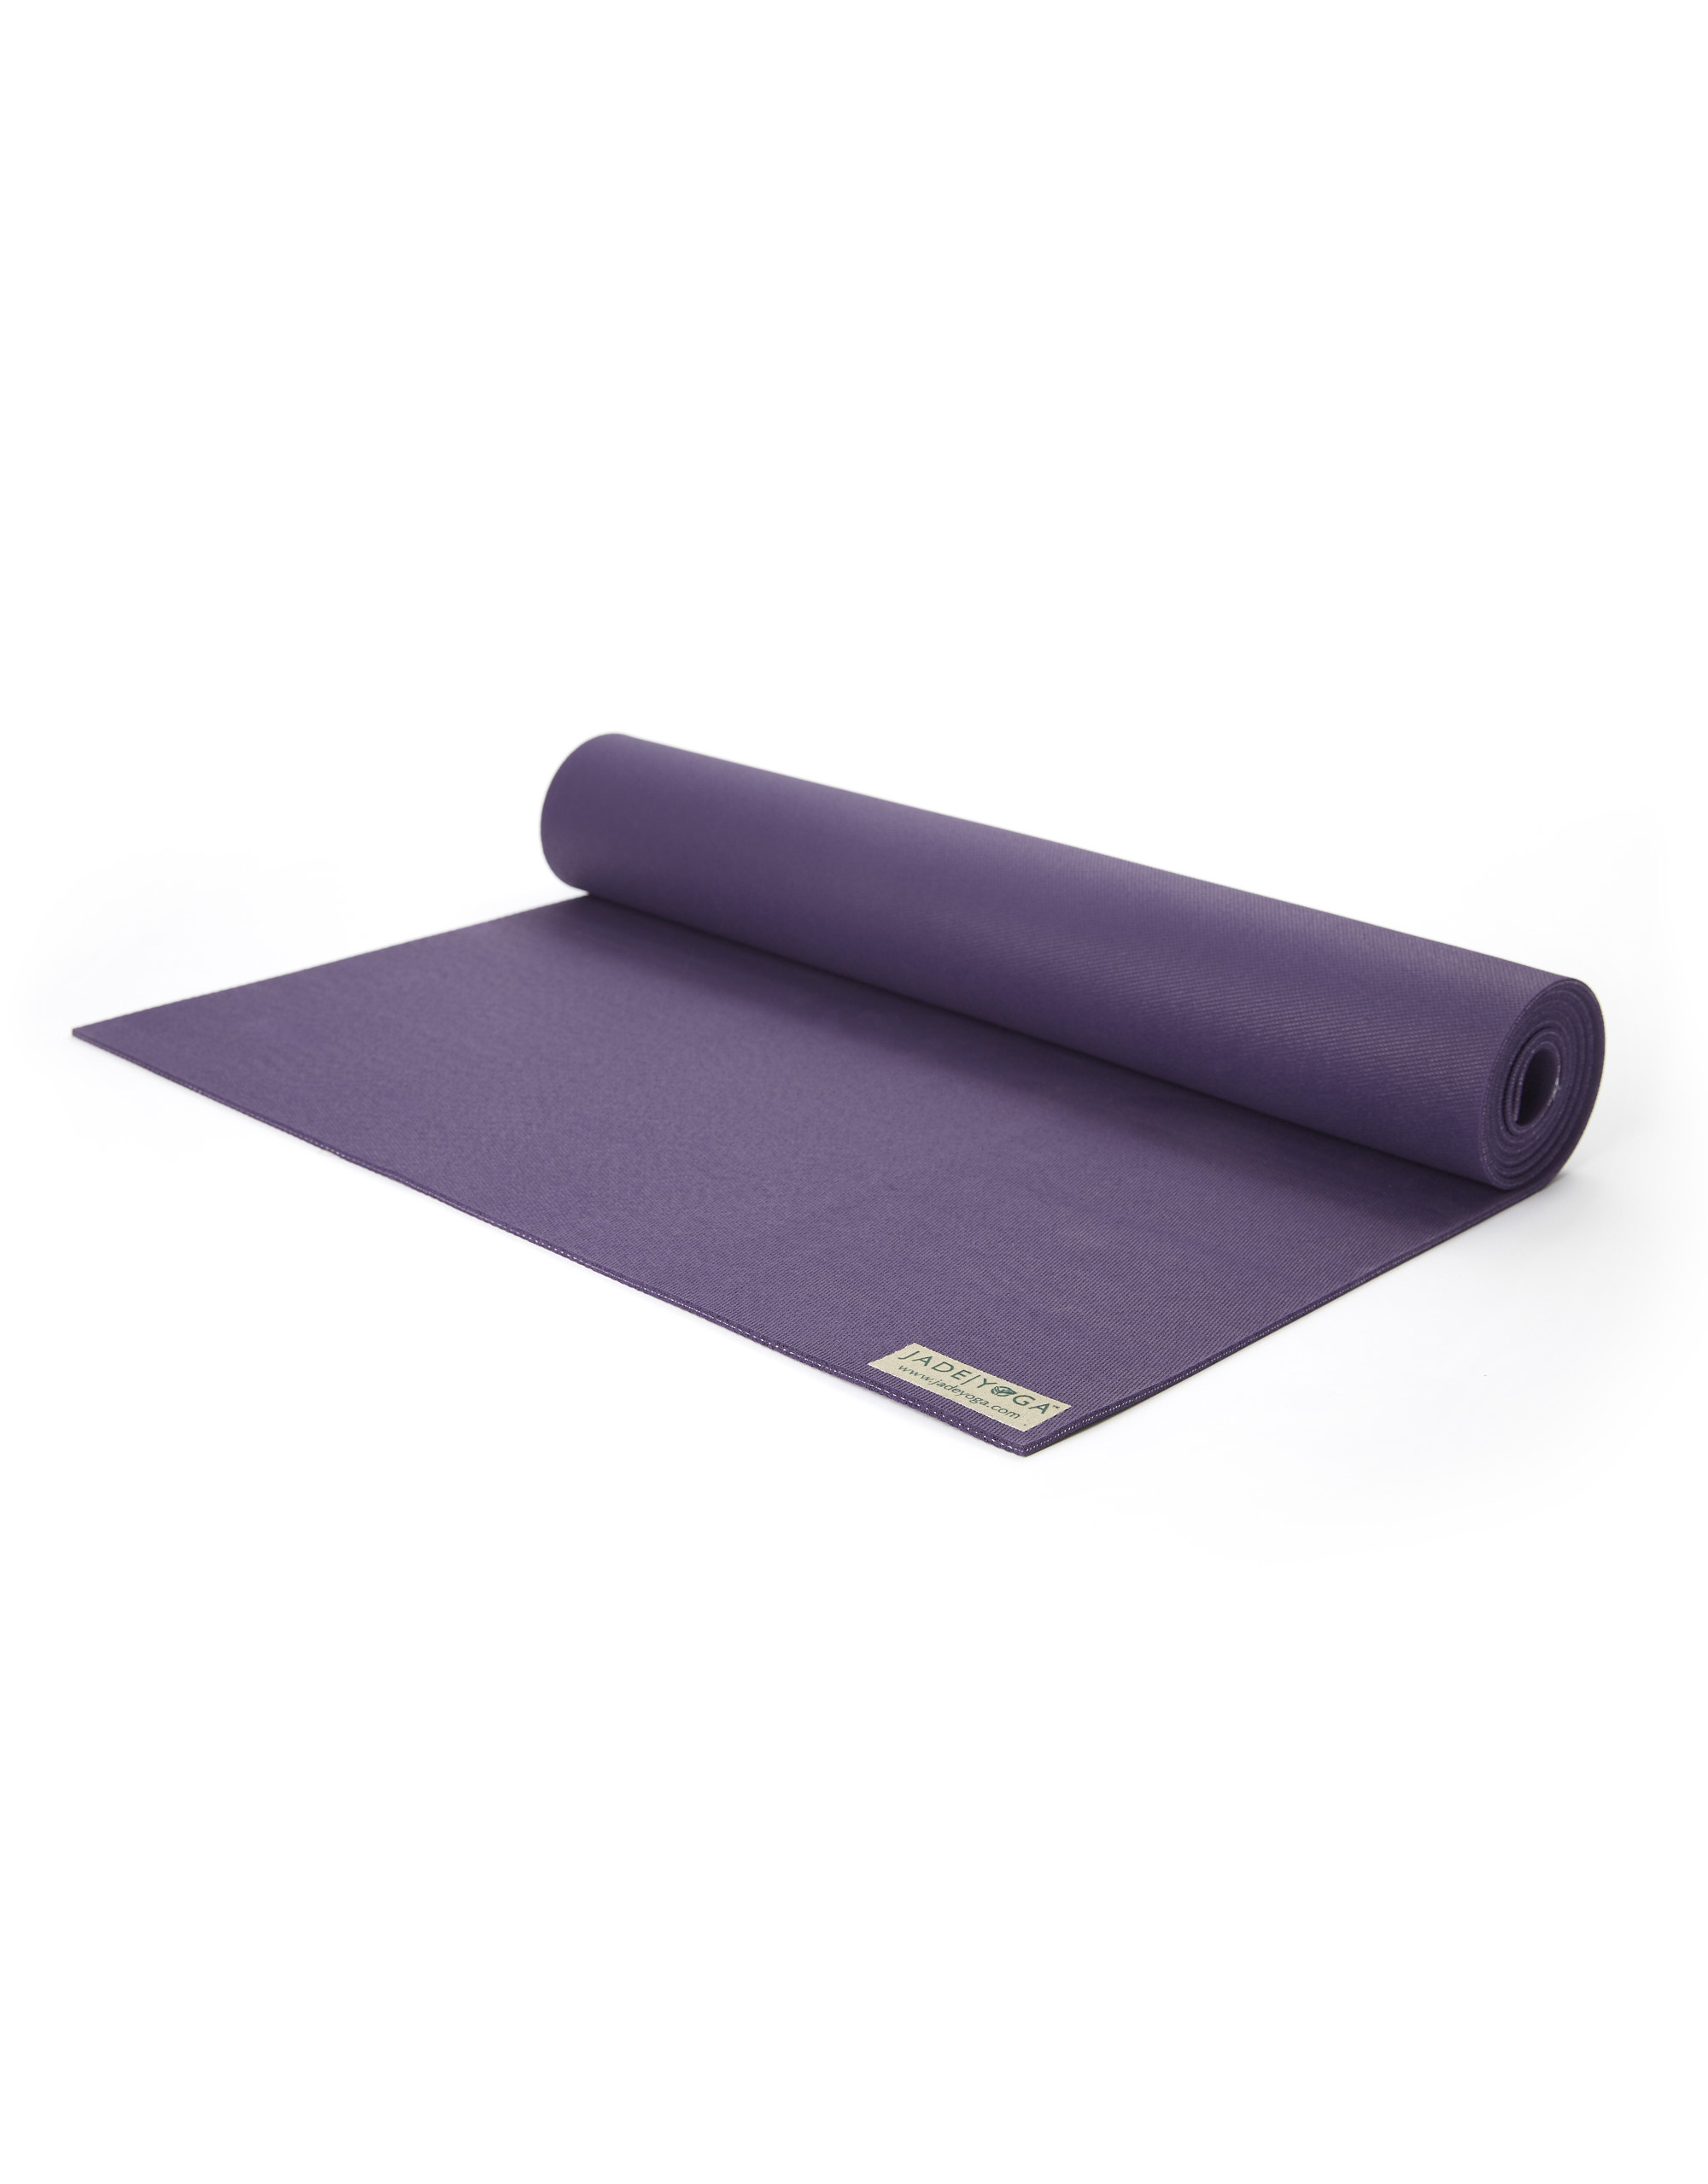 Know 5 essential benefits of using Cotton Yoga Mat